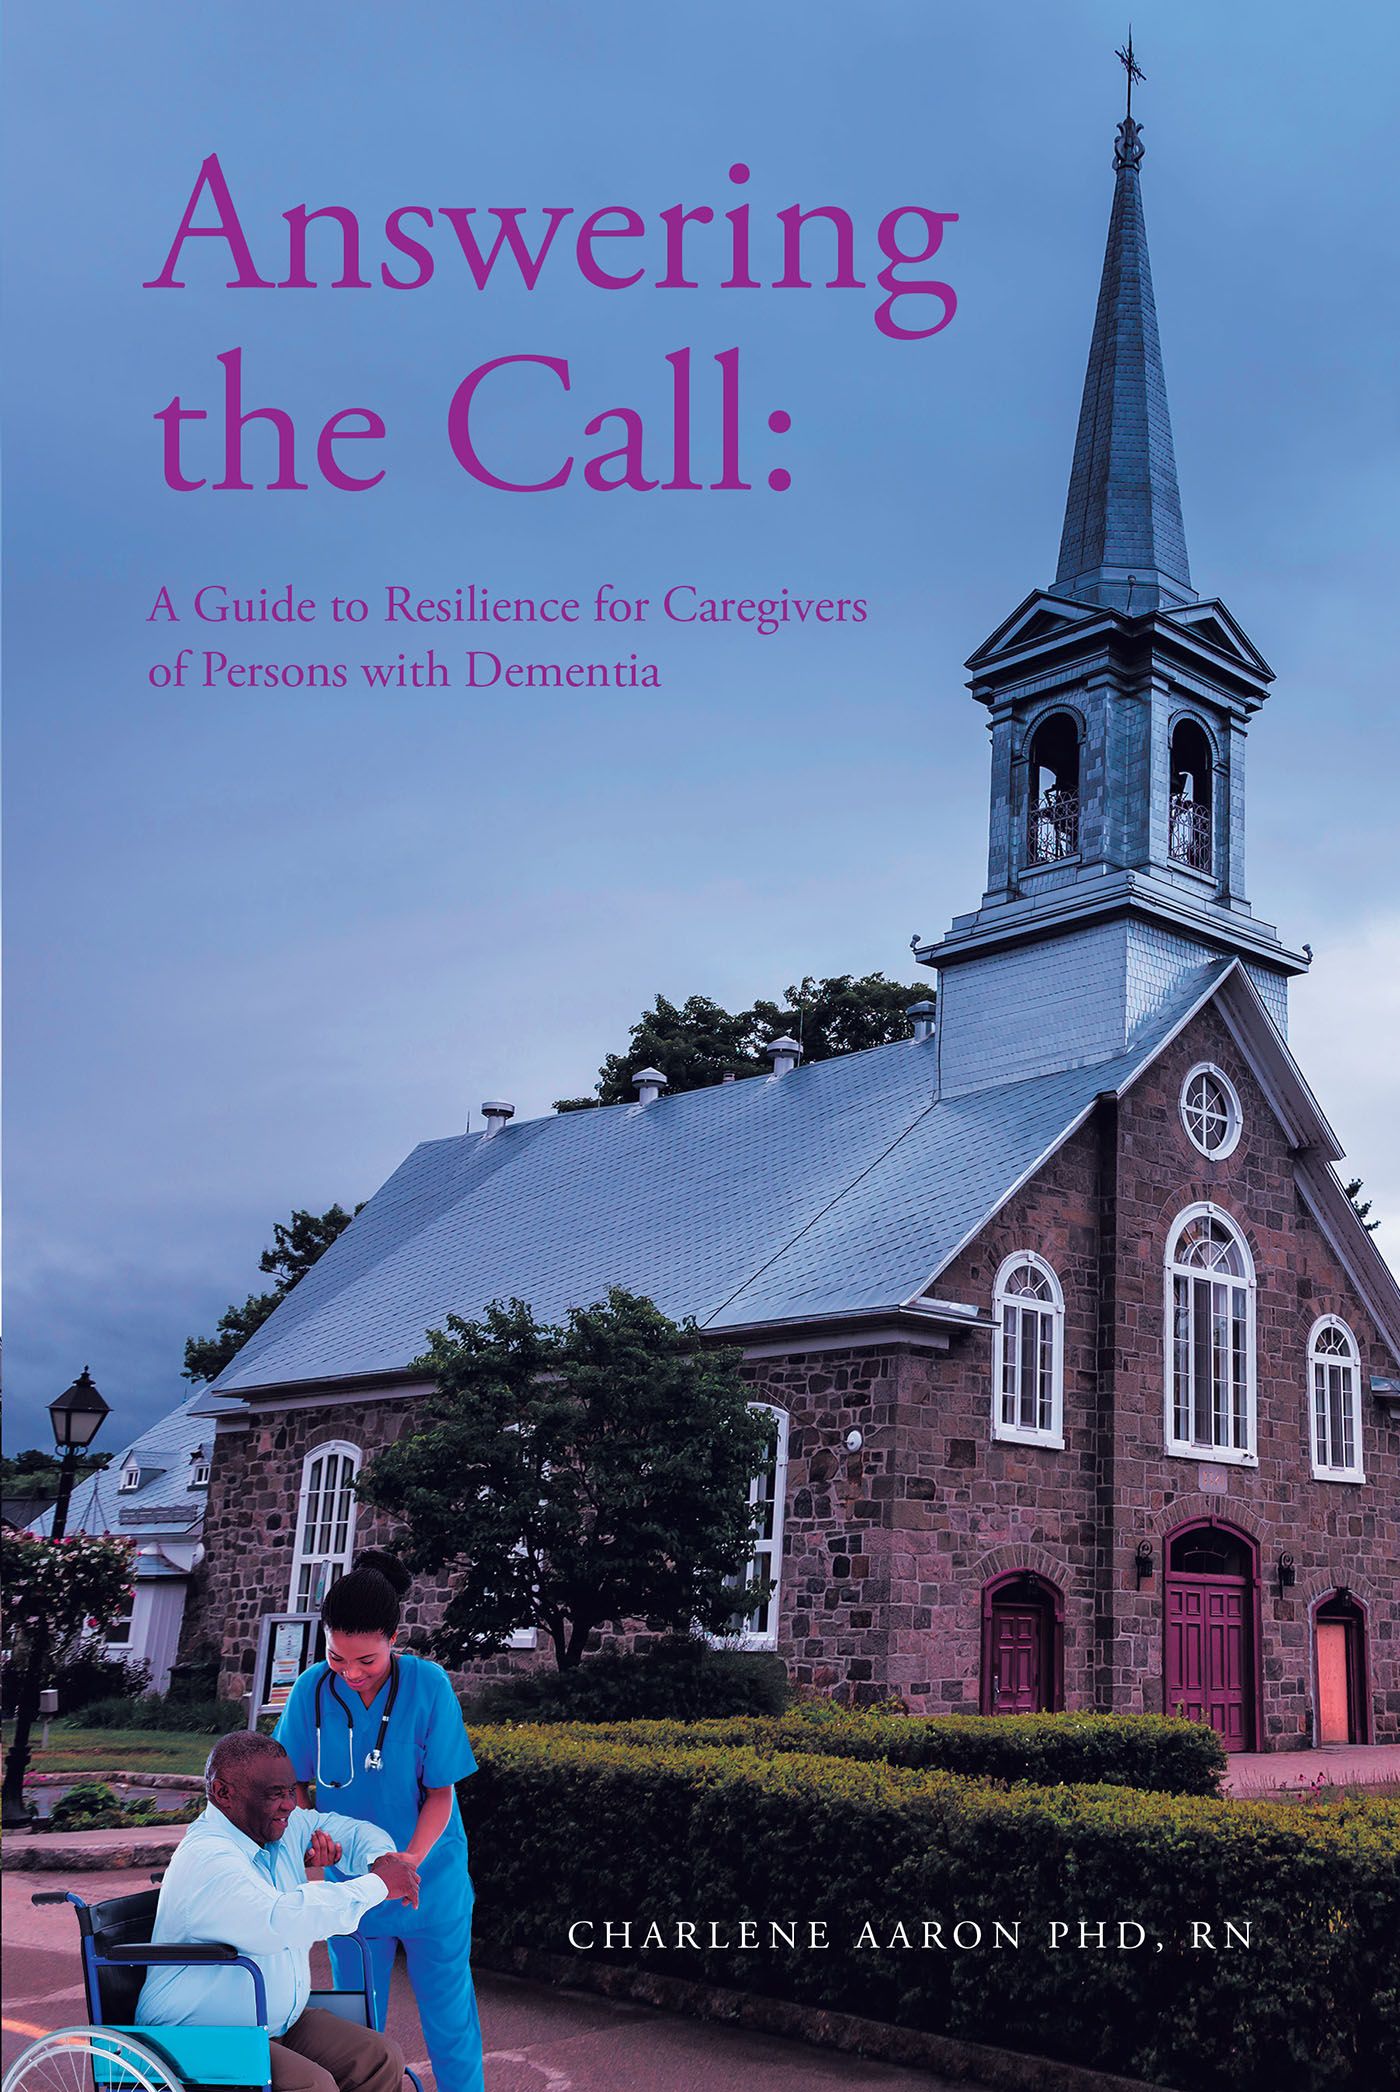 Dr. Charlene Aaron’s New Book, "Answering the Call," Holds a Brilliant Roadmap for People Giving Care to Individuals with Dementia